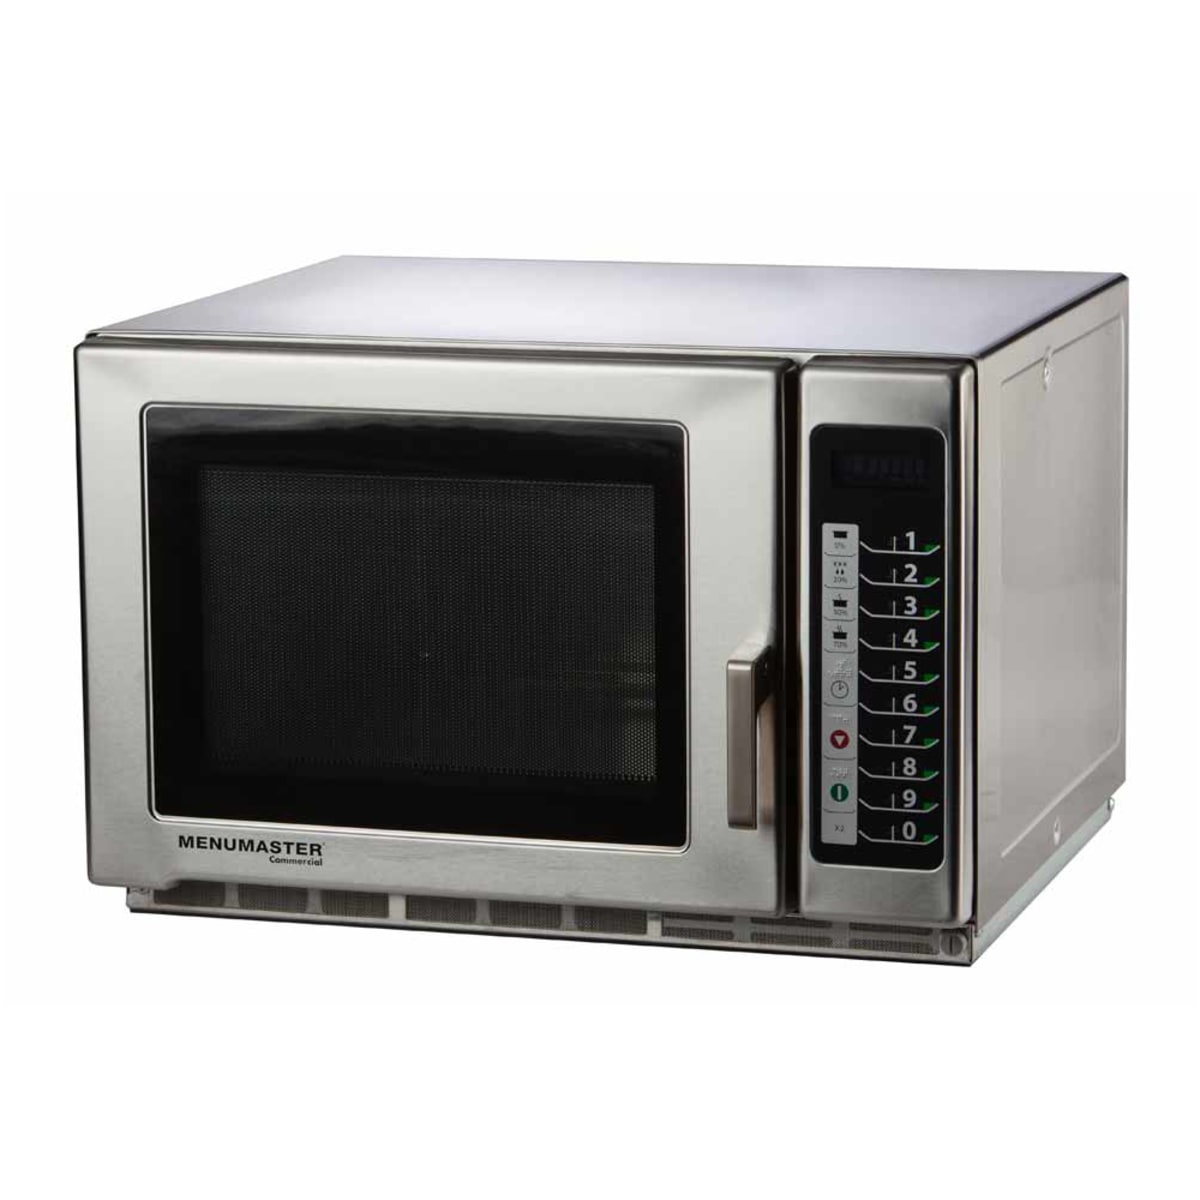 AS Condiment-Microwave-Coffee Stand Model SS-1